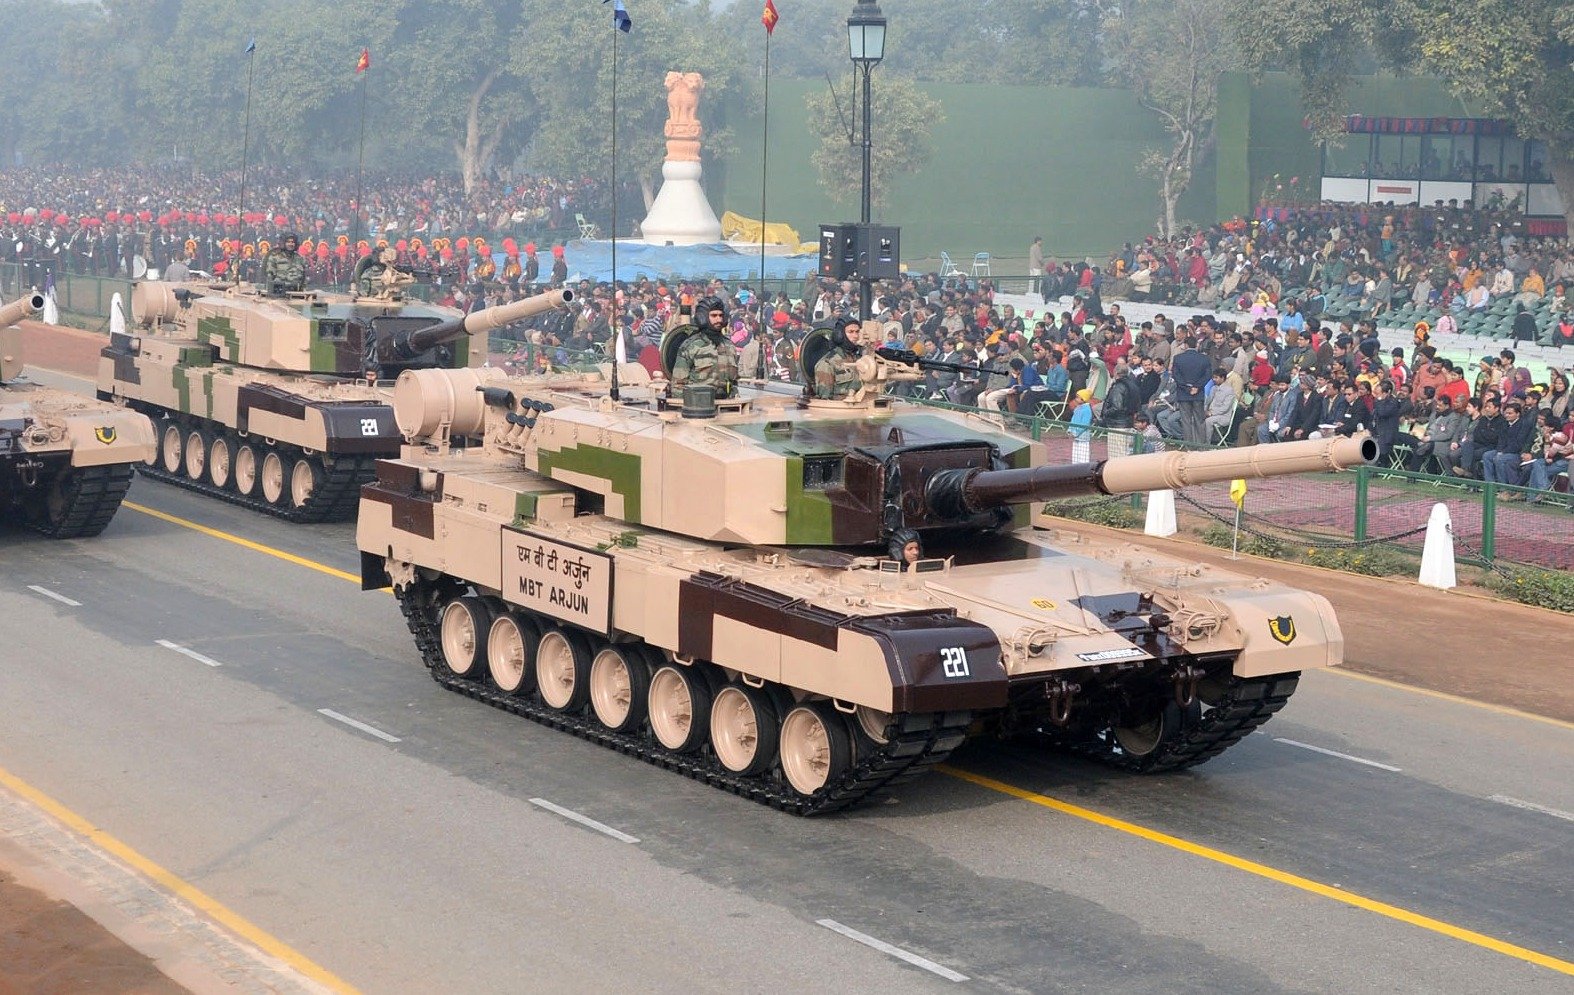 India's Tank Took Decades to Make. Why? | Interest